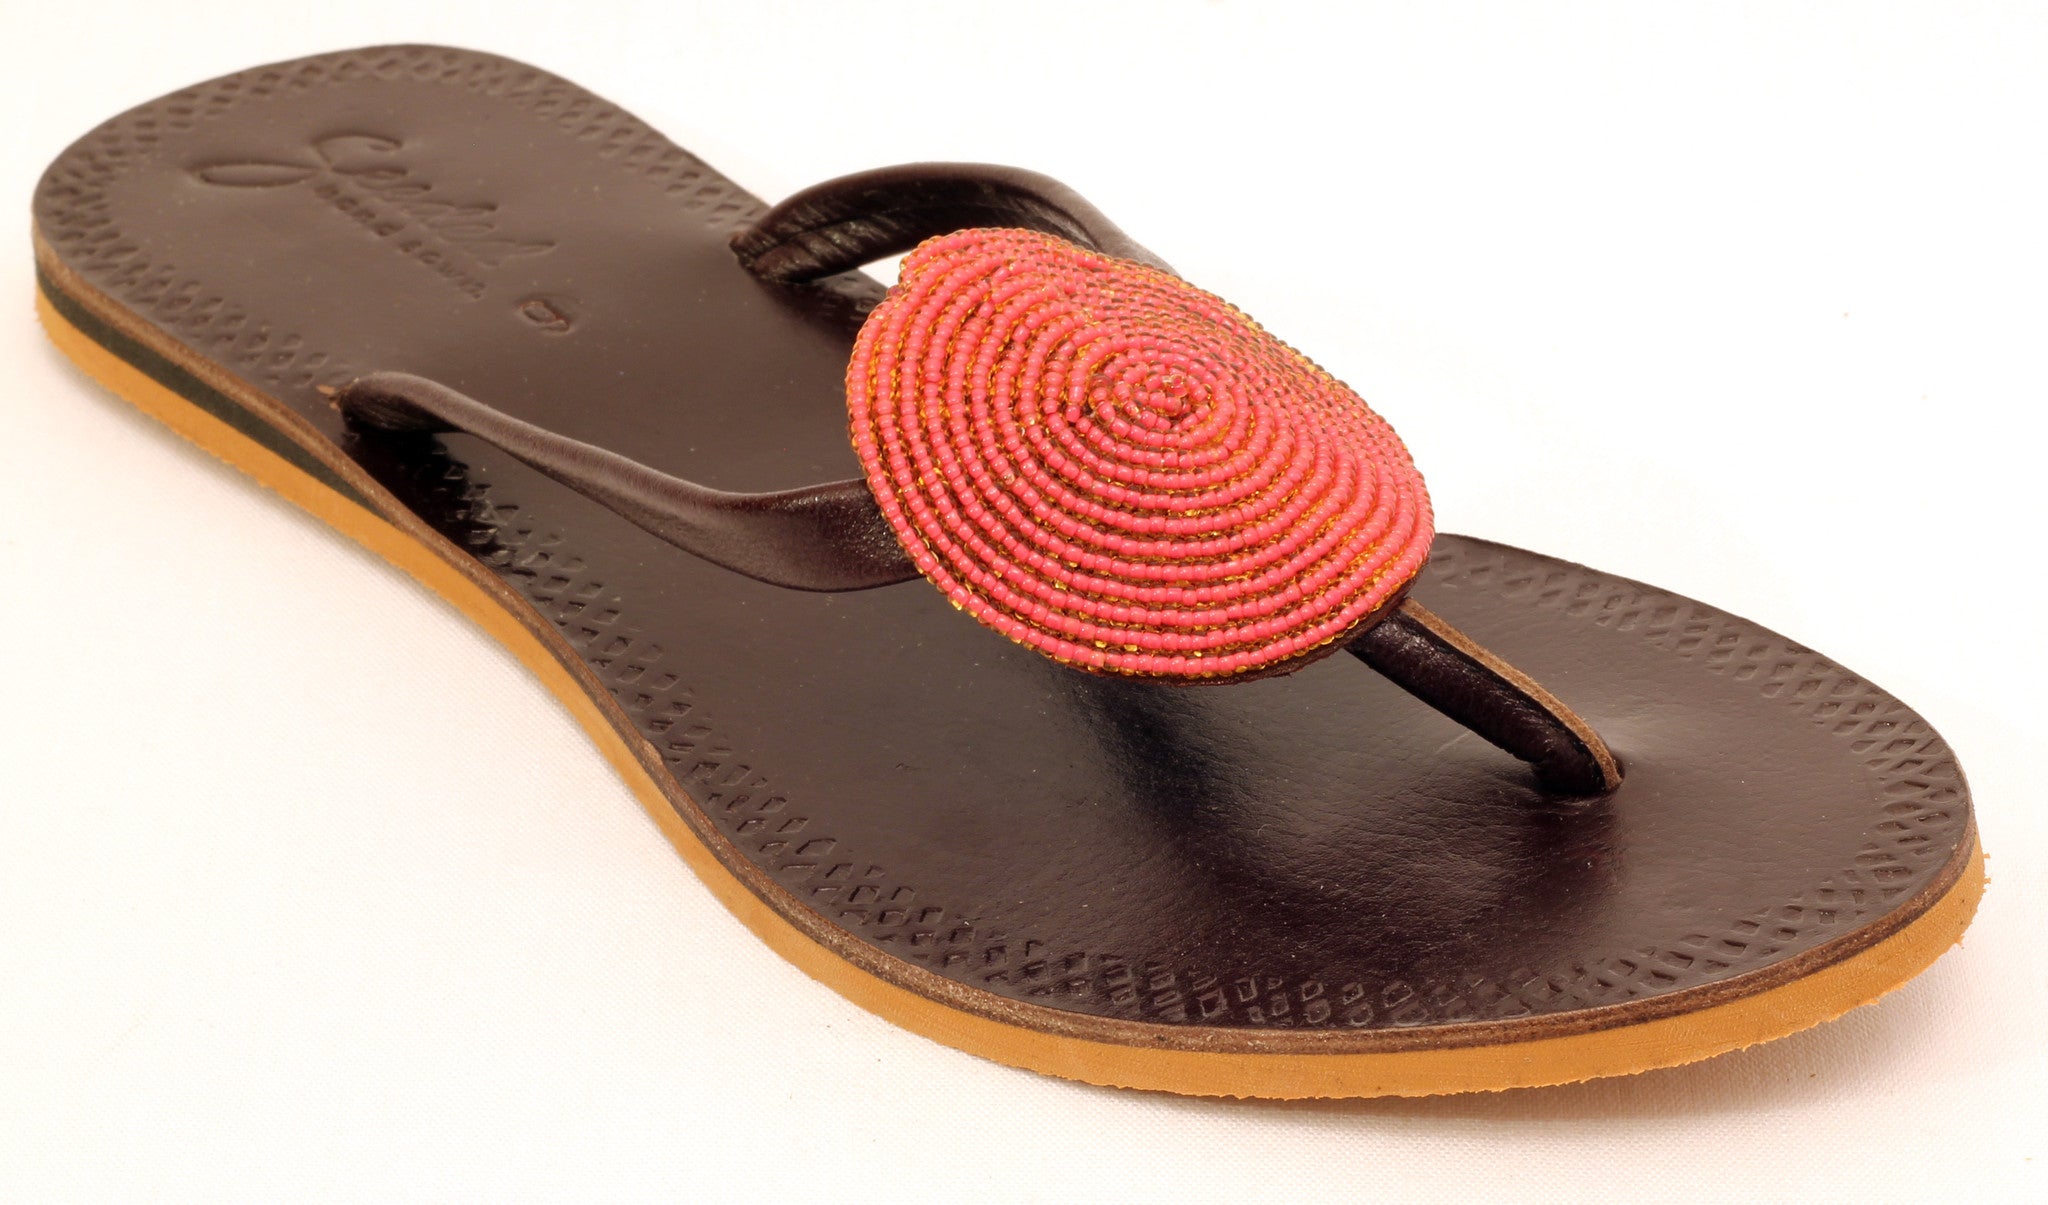 Fair trade sandals ethically handmade by empowered artisans in East Africa.